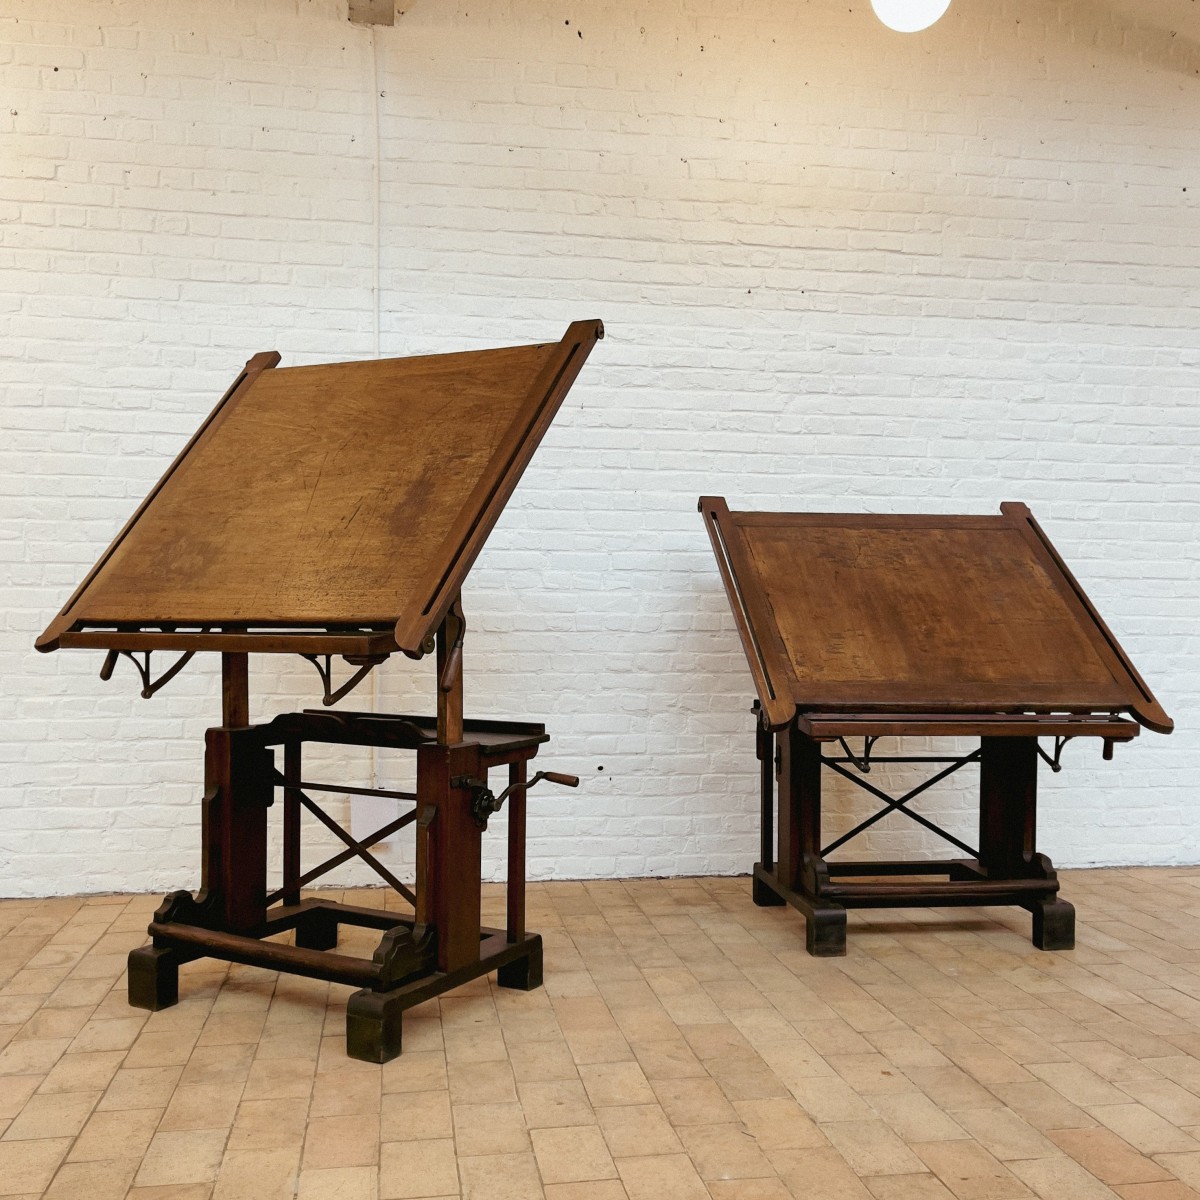 Exceptional pair of architect tables c.1900